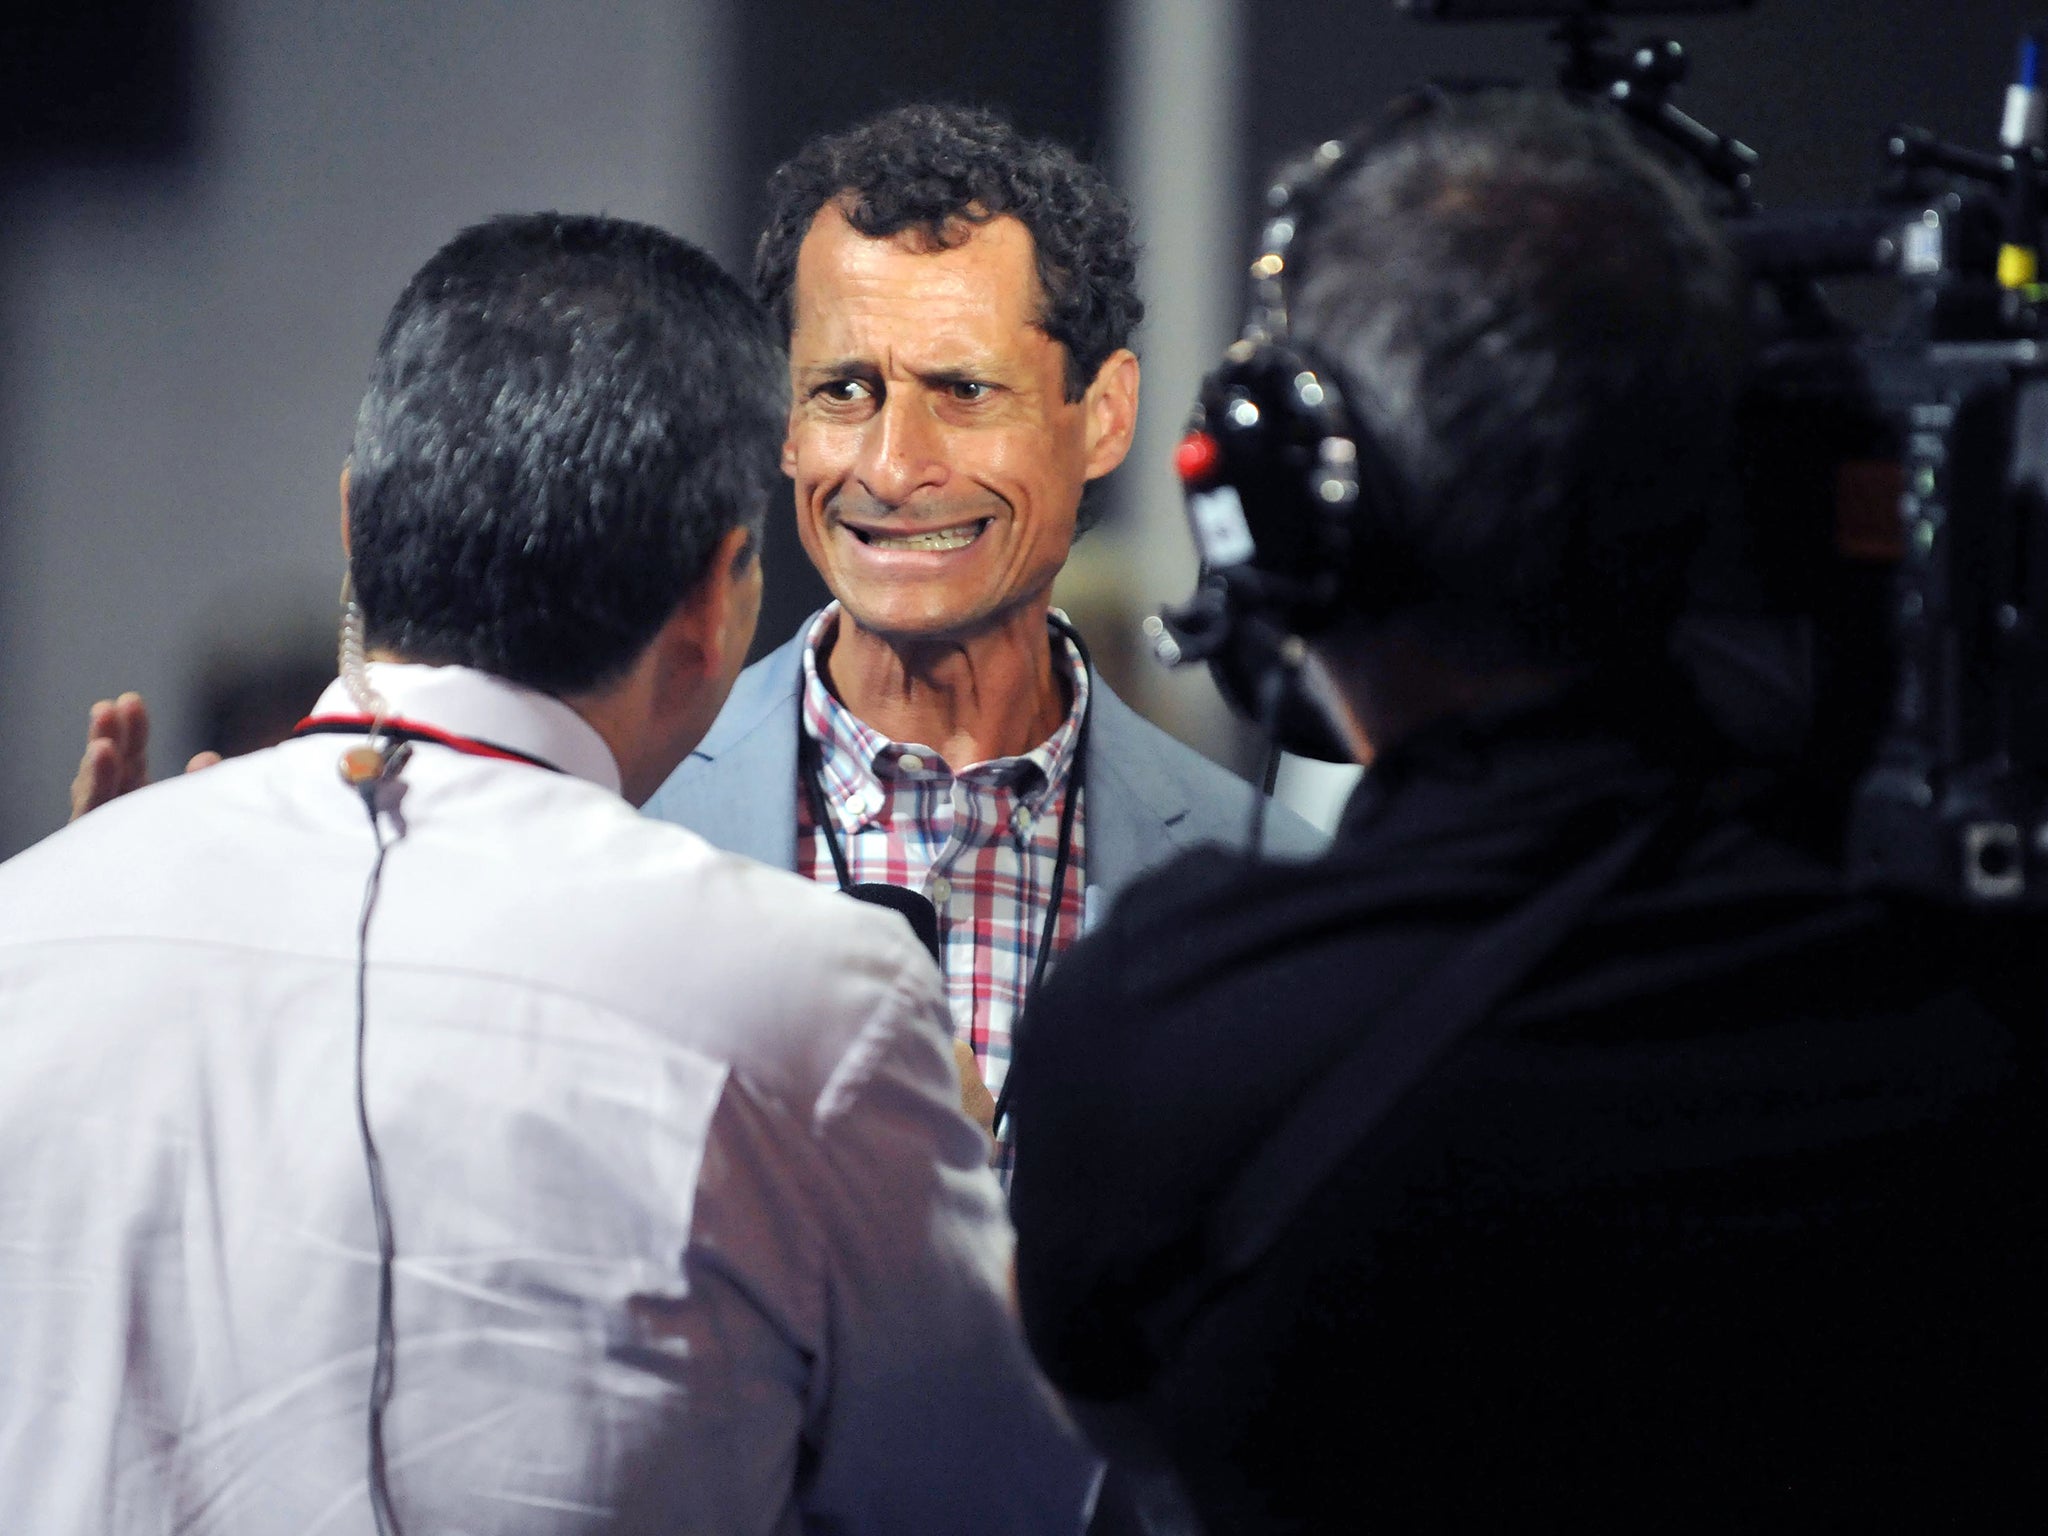 Former Congressman Anthony Weiner, whose resignation was forced after Breitbart broke the news of his extramarital sexting